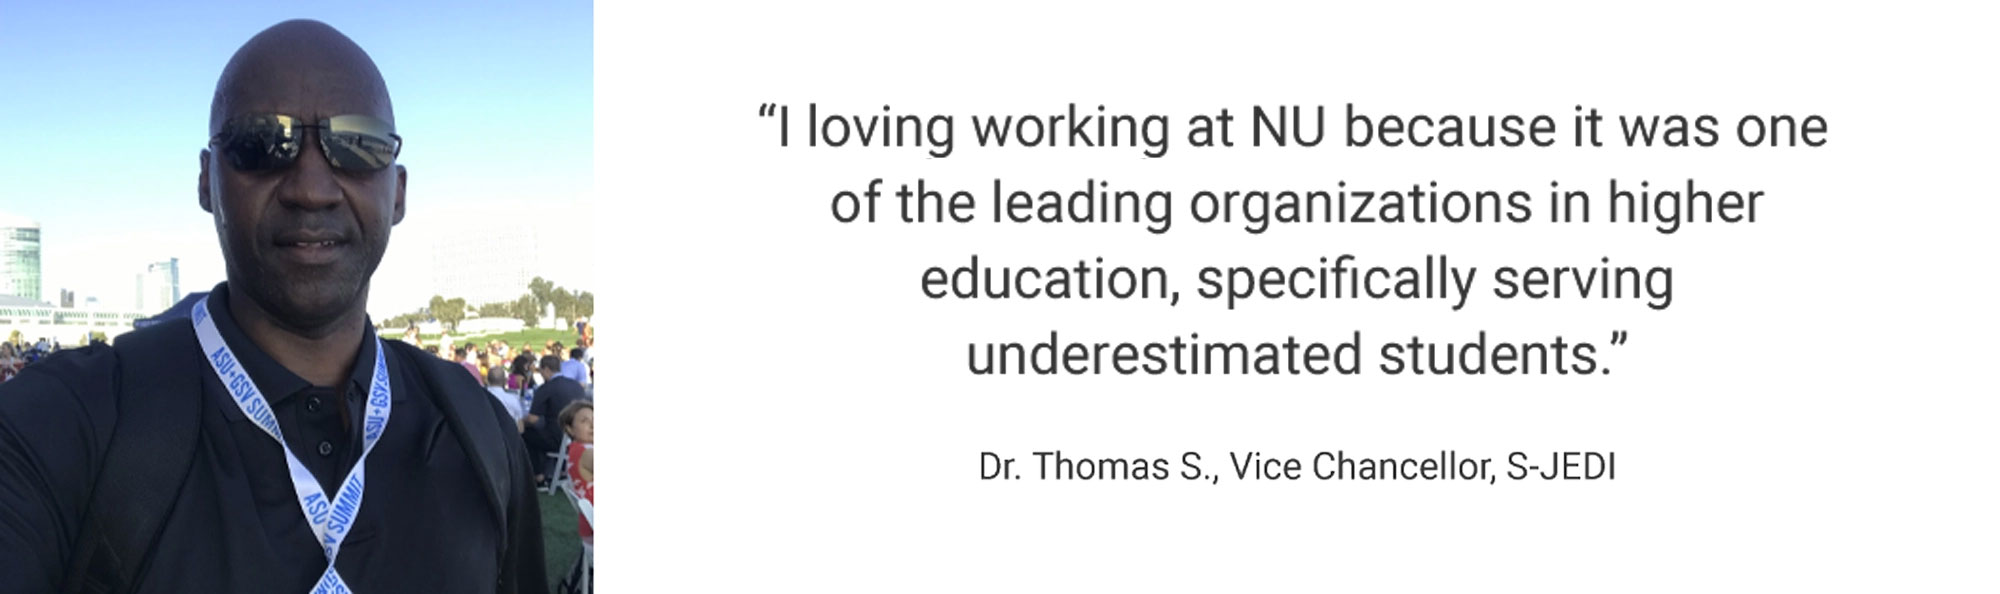 Employee Testimonial, "I loving working at NUS because it was one of the leading organizations in higher education, specifically serving underestimated students." Dr. Thomas S., Vice Chancellor, S-JEDI